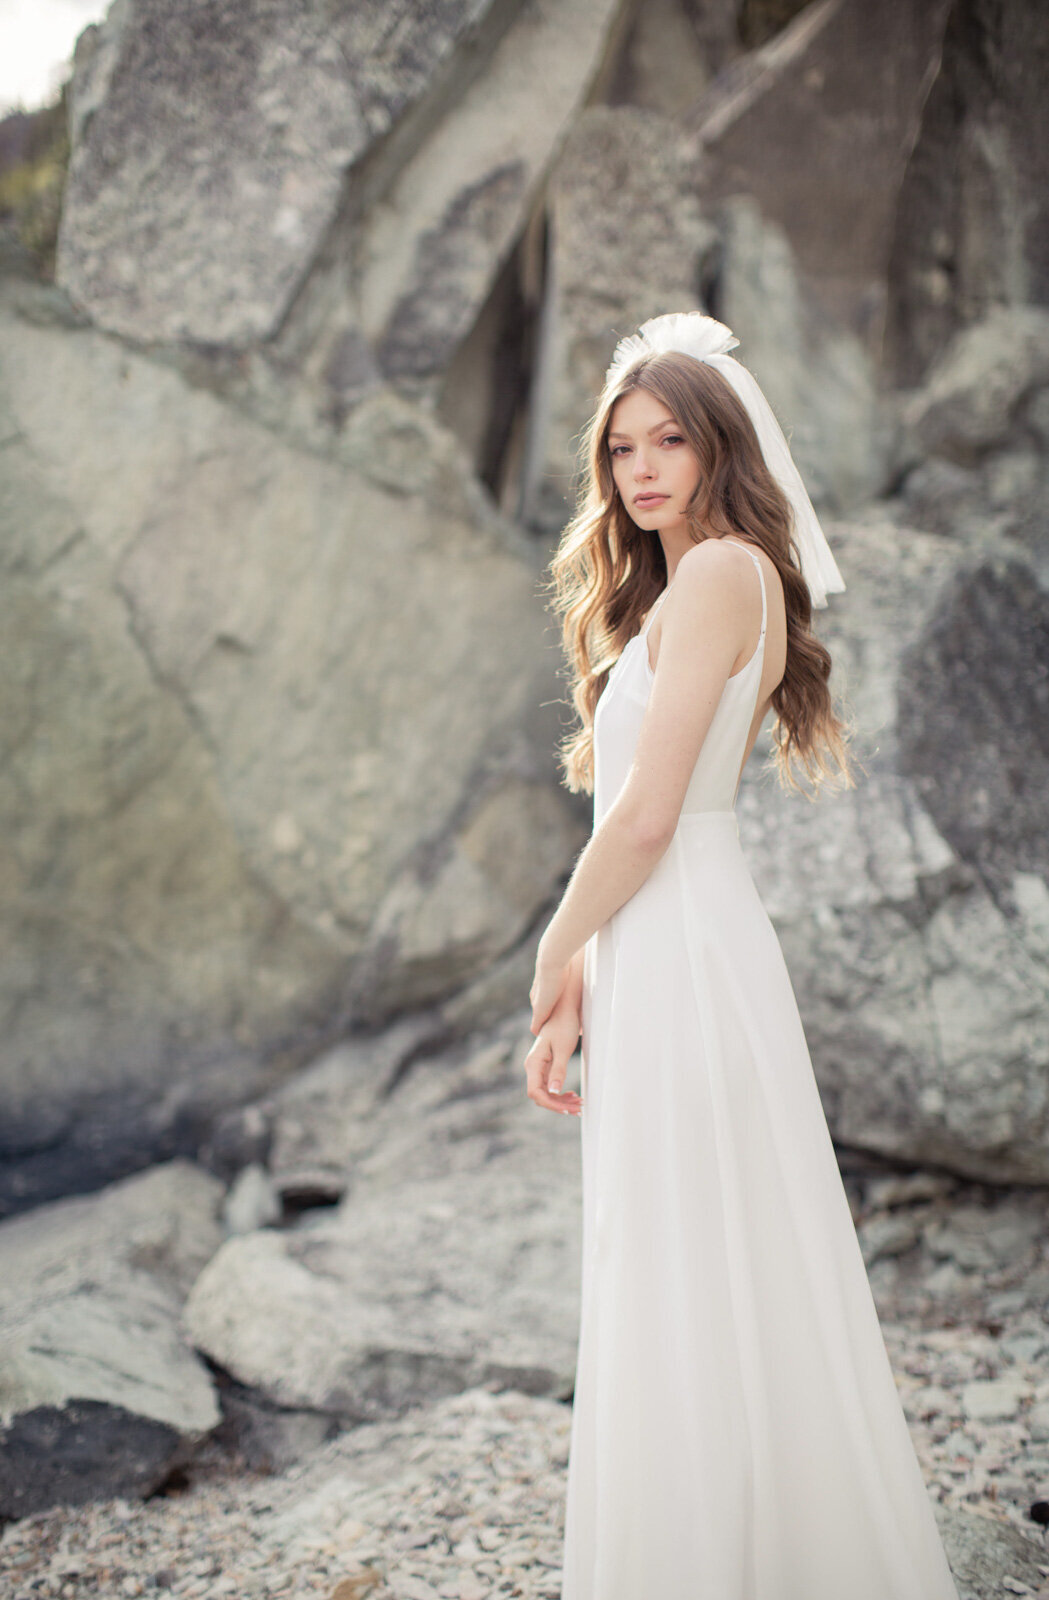 Classic and simple A Line wedding dress By Catalfo, elegant wedding fashion based in Kelowna. Featured on the Brontë Bride Vendor Guide.